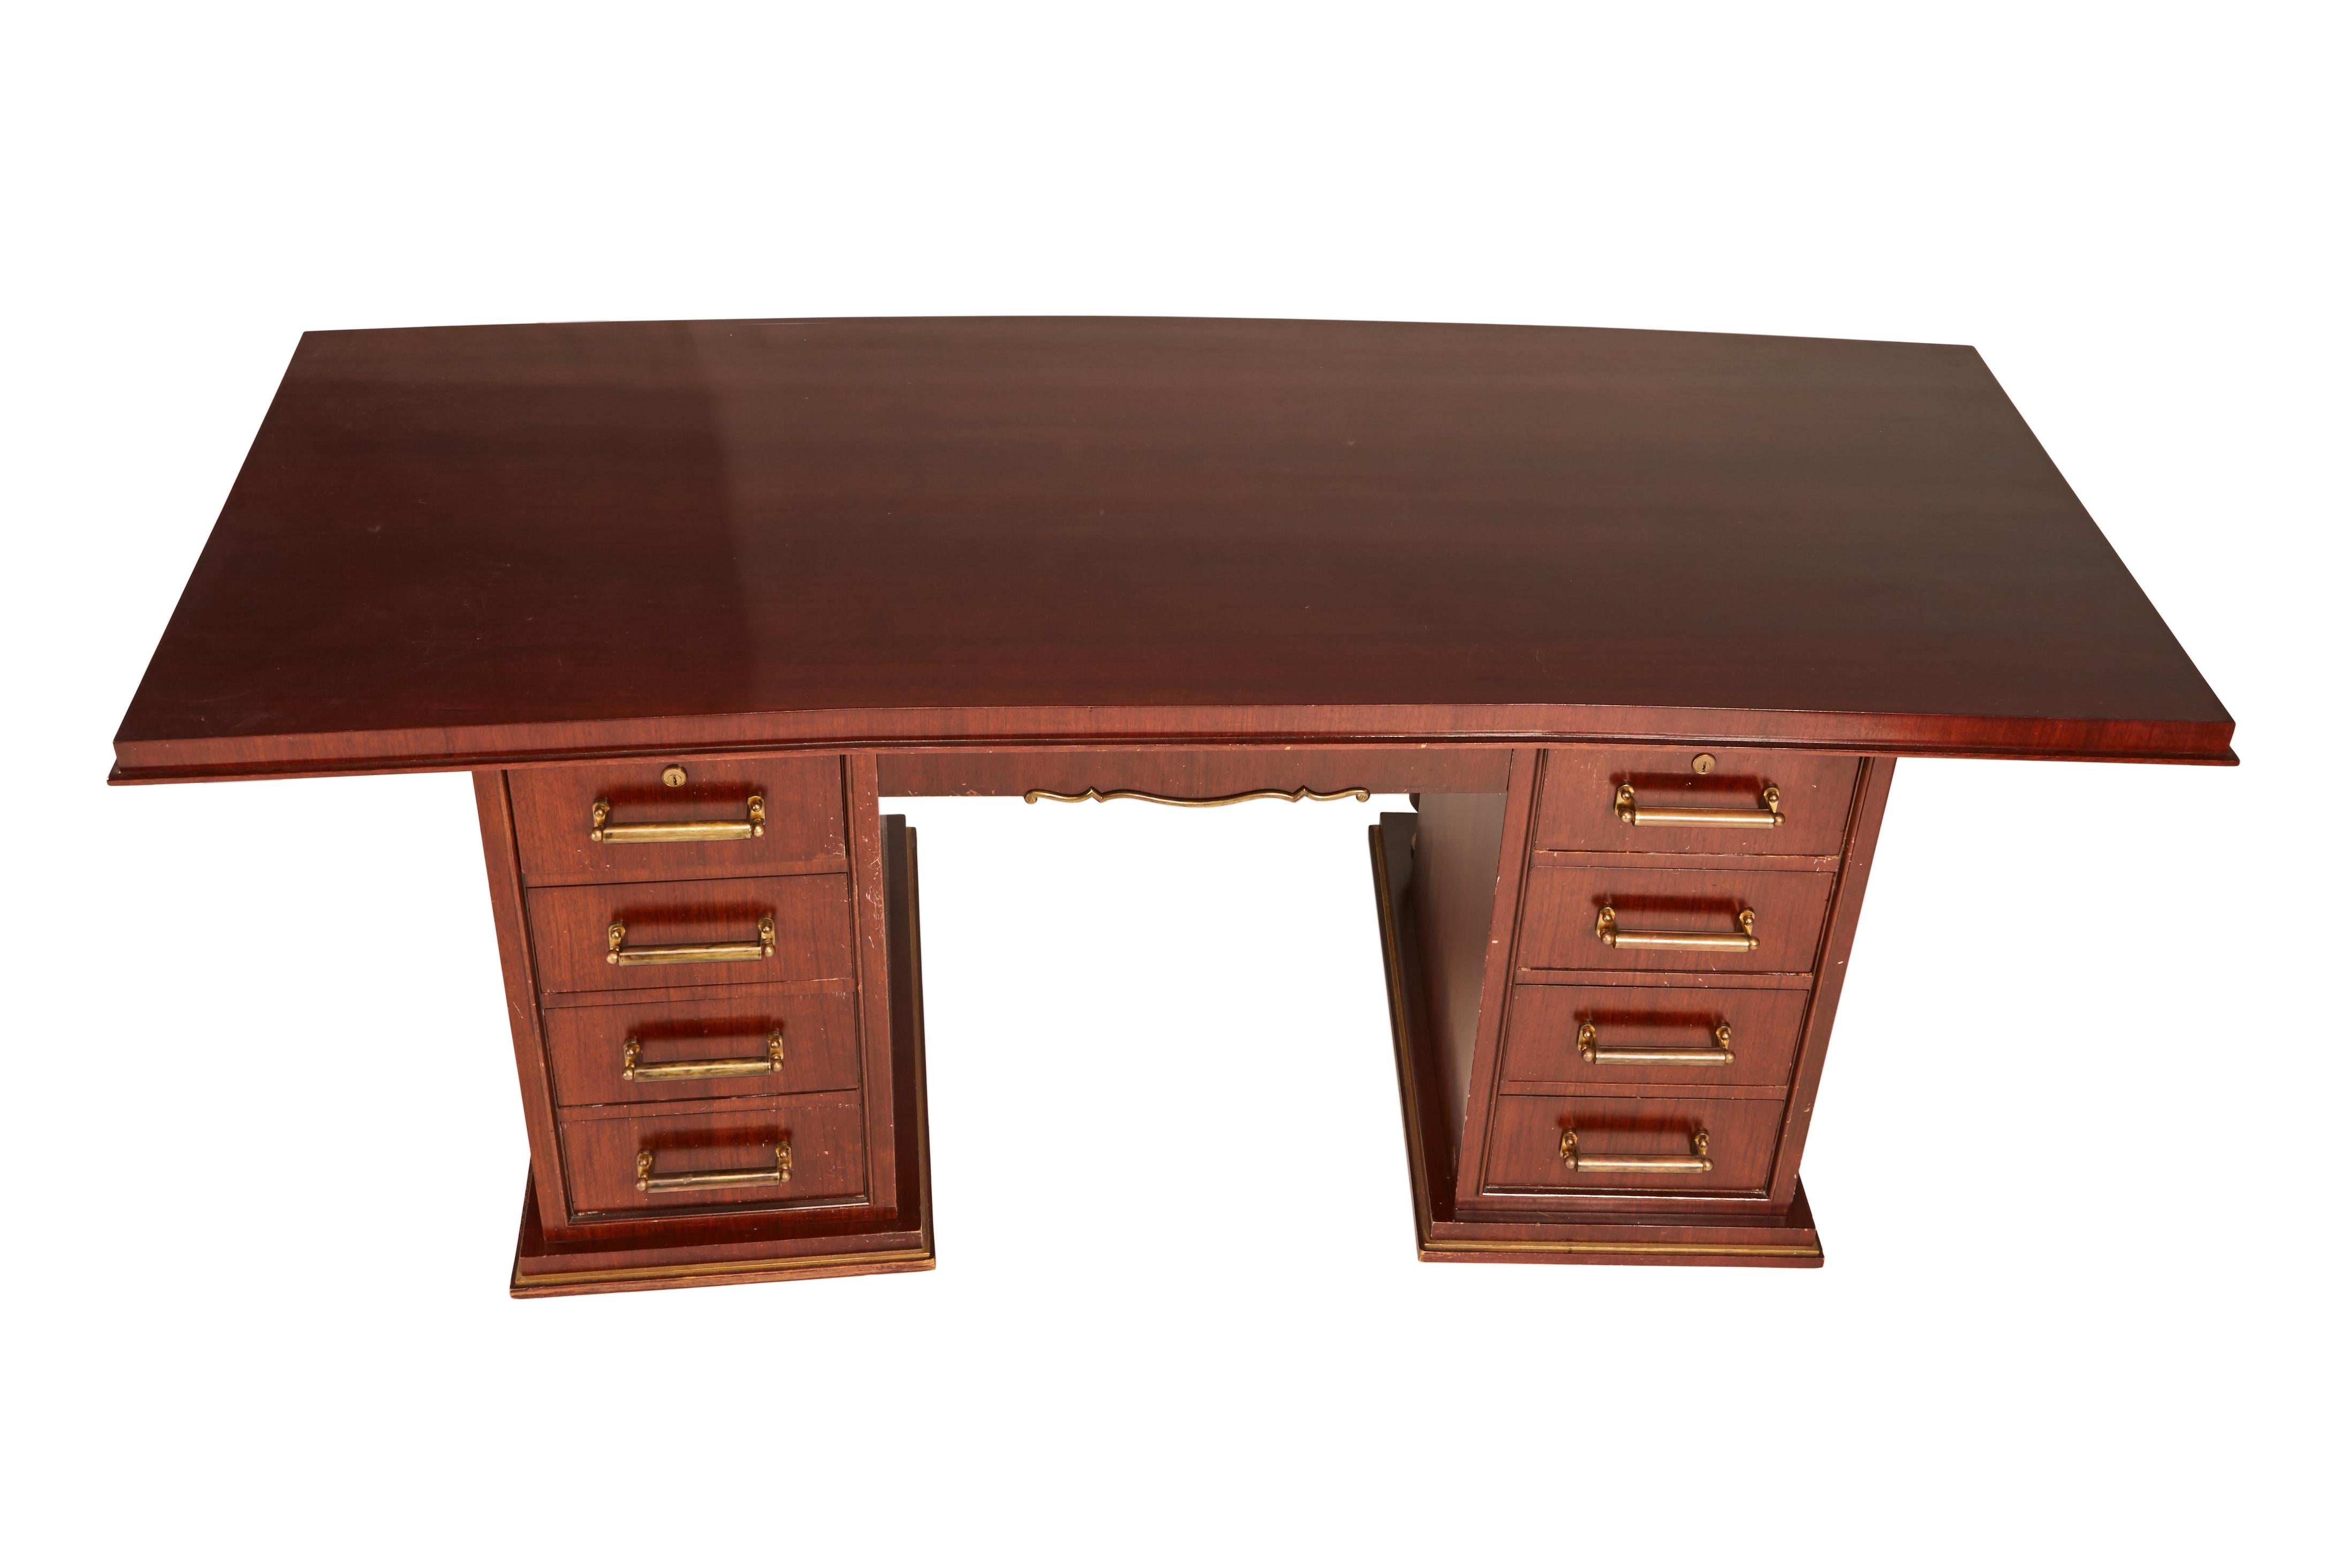 Jules Leleu (1883-1961) double-fronted mahogany and brass desk, circa 1935.
Having two set of four pedestal drawers and a single frieze drawer, accented in gilt bronze. Inset with plaque J. Leleu.... no key.
Wear to finish on top and drawers, to